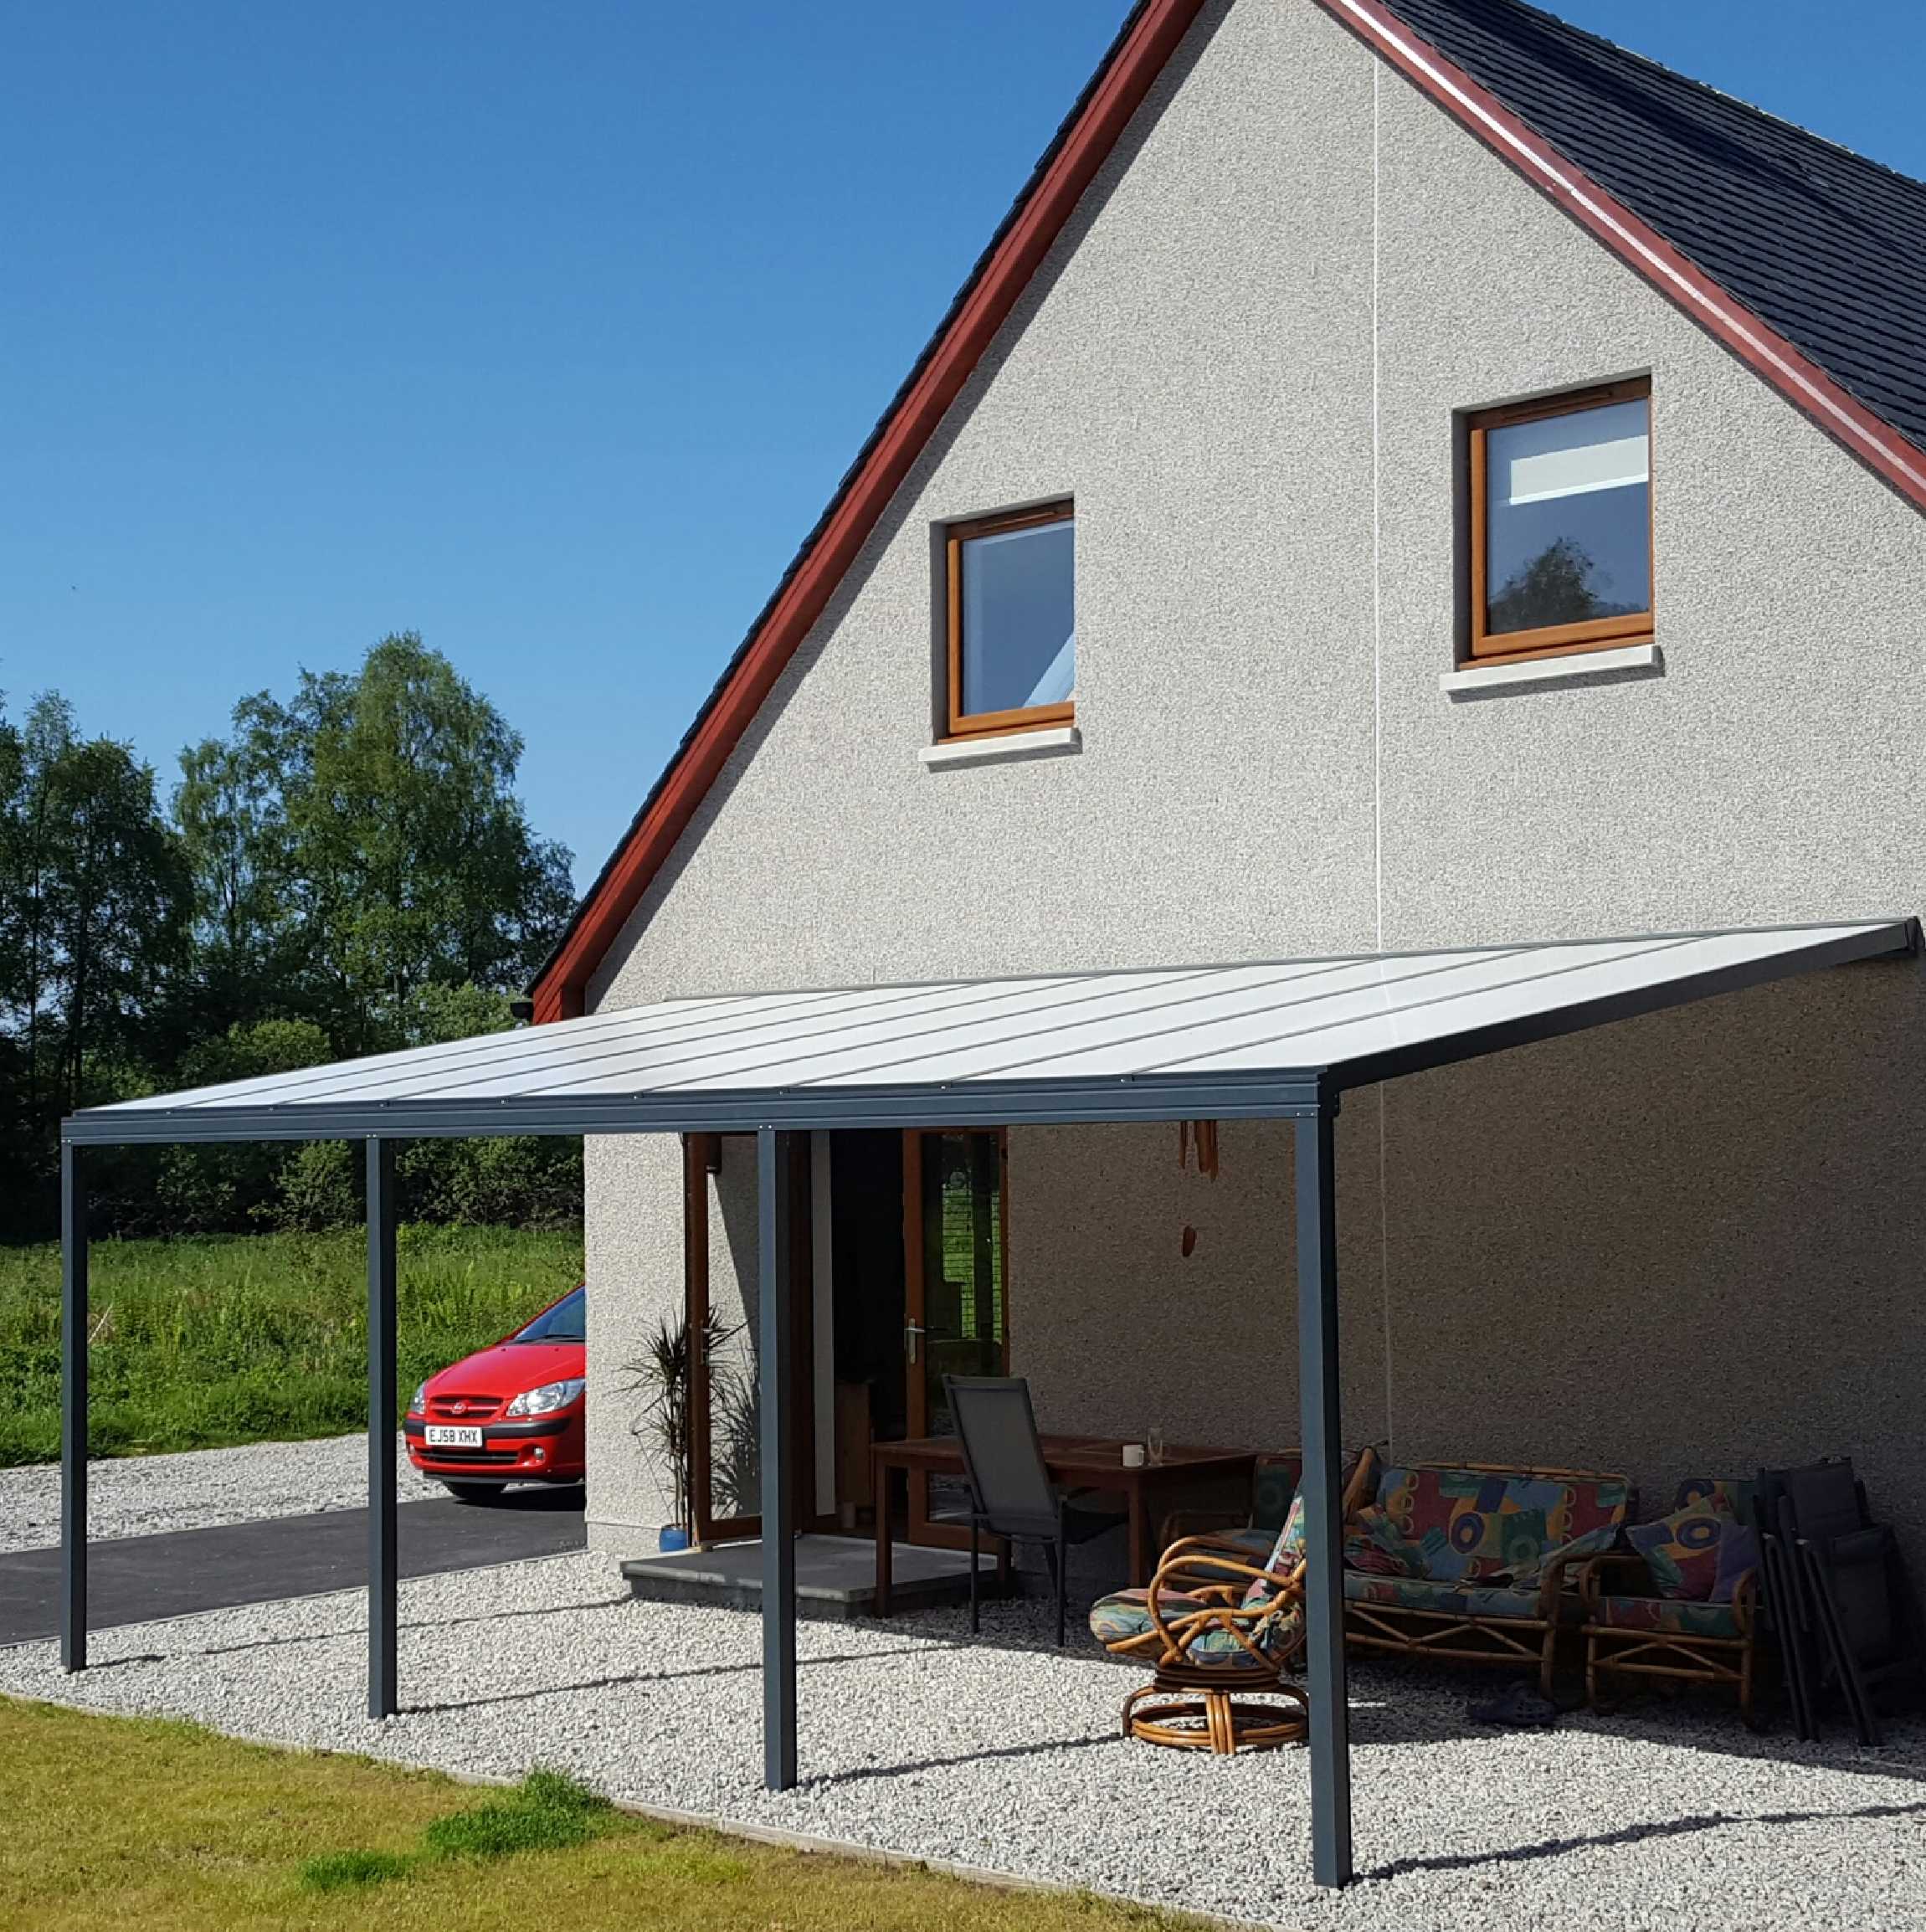 Great selection of SPECIAL OFFER Omega Smart Lean-To Canopy, Anthracite Grey, 16mm Polycarbonate Glazing - 5.0m (W) x 2.0m (P), (3) Supporting Posts